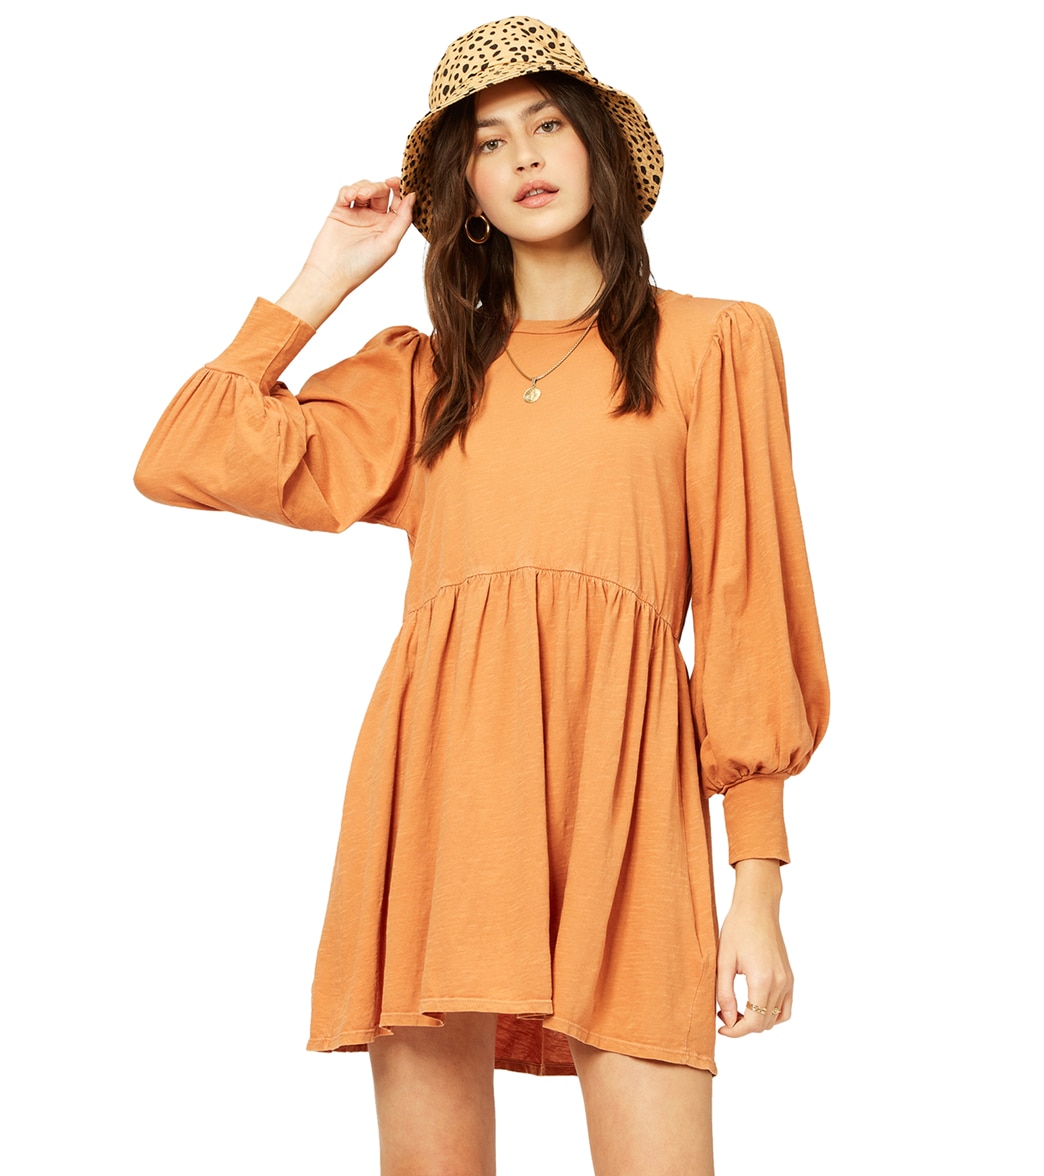 Billabong Women's Day To Dream Dress - Toffee Large - Swimoutlet.com